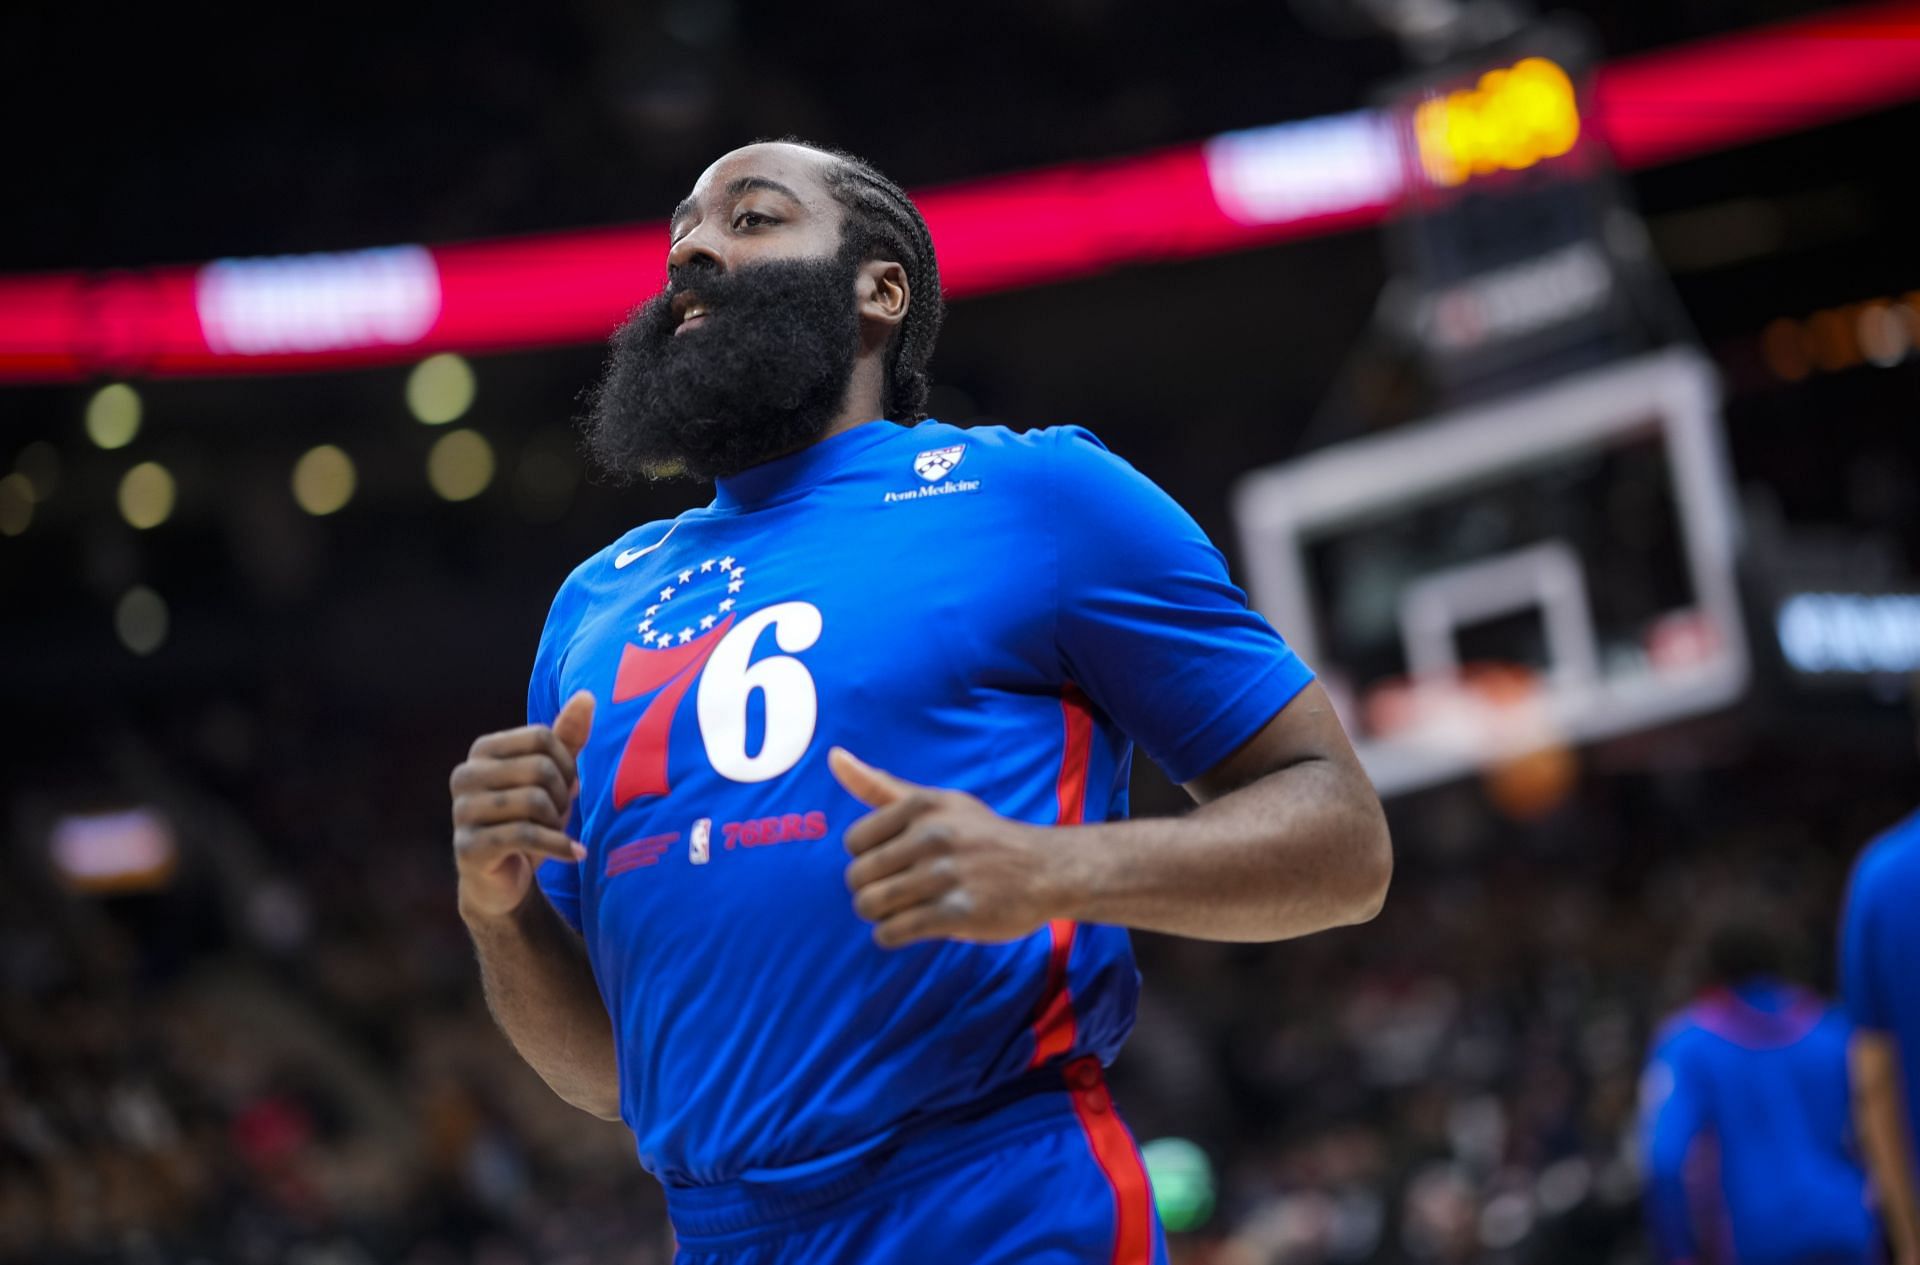 Harden played for Arizona State University before the NBA (Image via Getty Images)